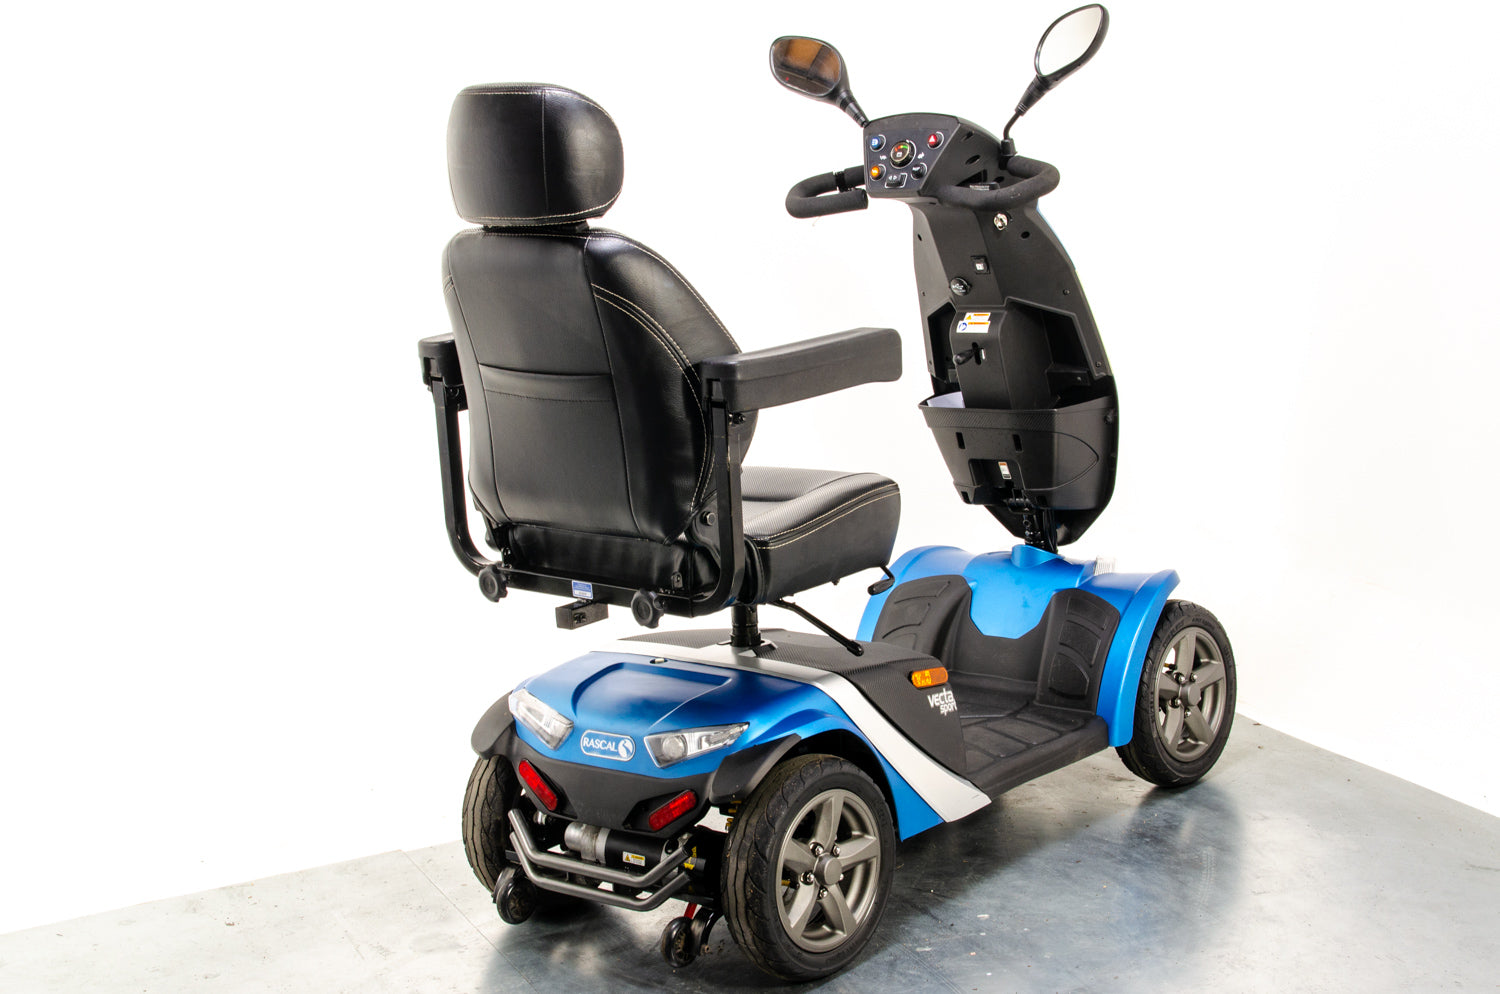 Rascal Vecta Sport Used Electric Mobility Scooter 8mph Suspension Max Grip All-Terrain Road Legal Blue 13319